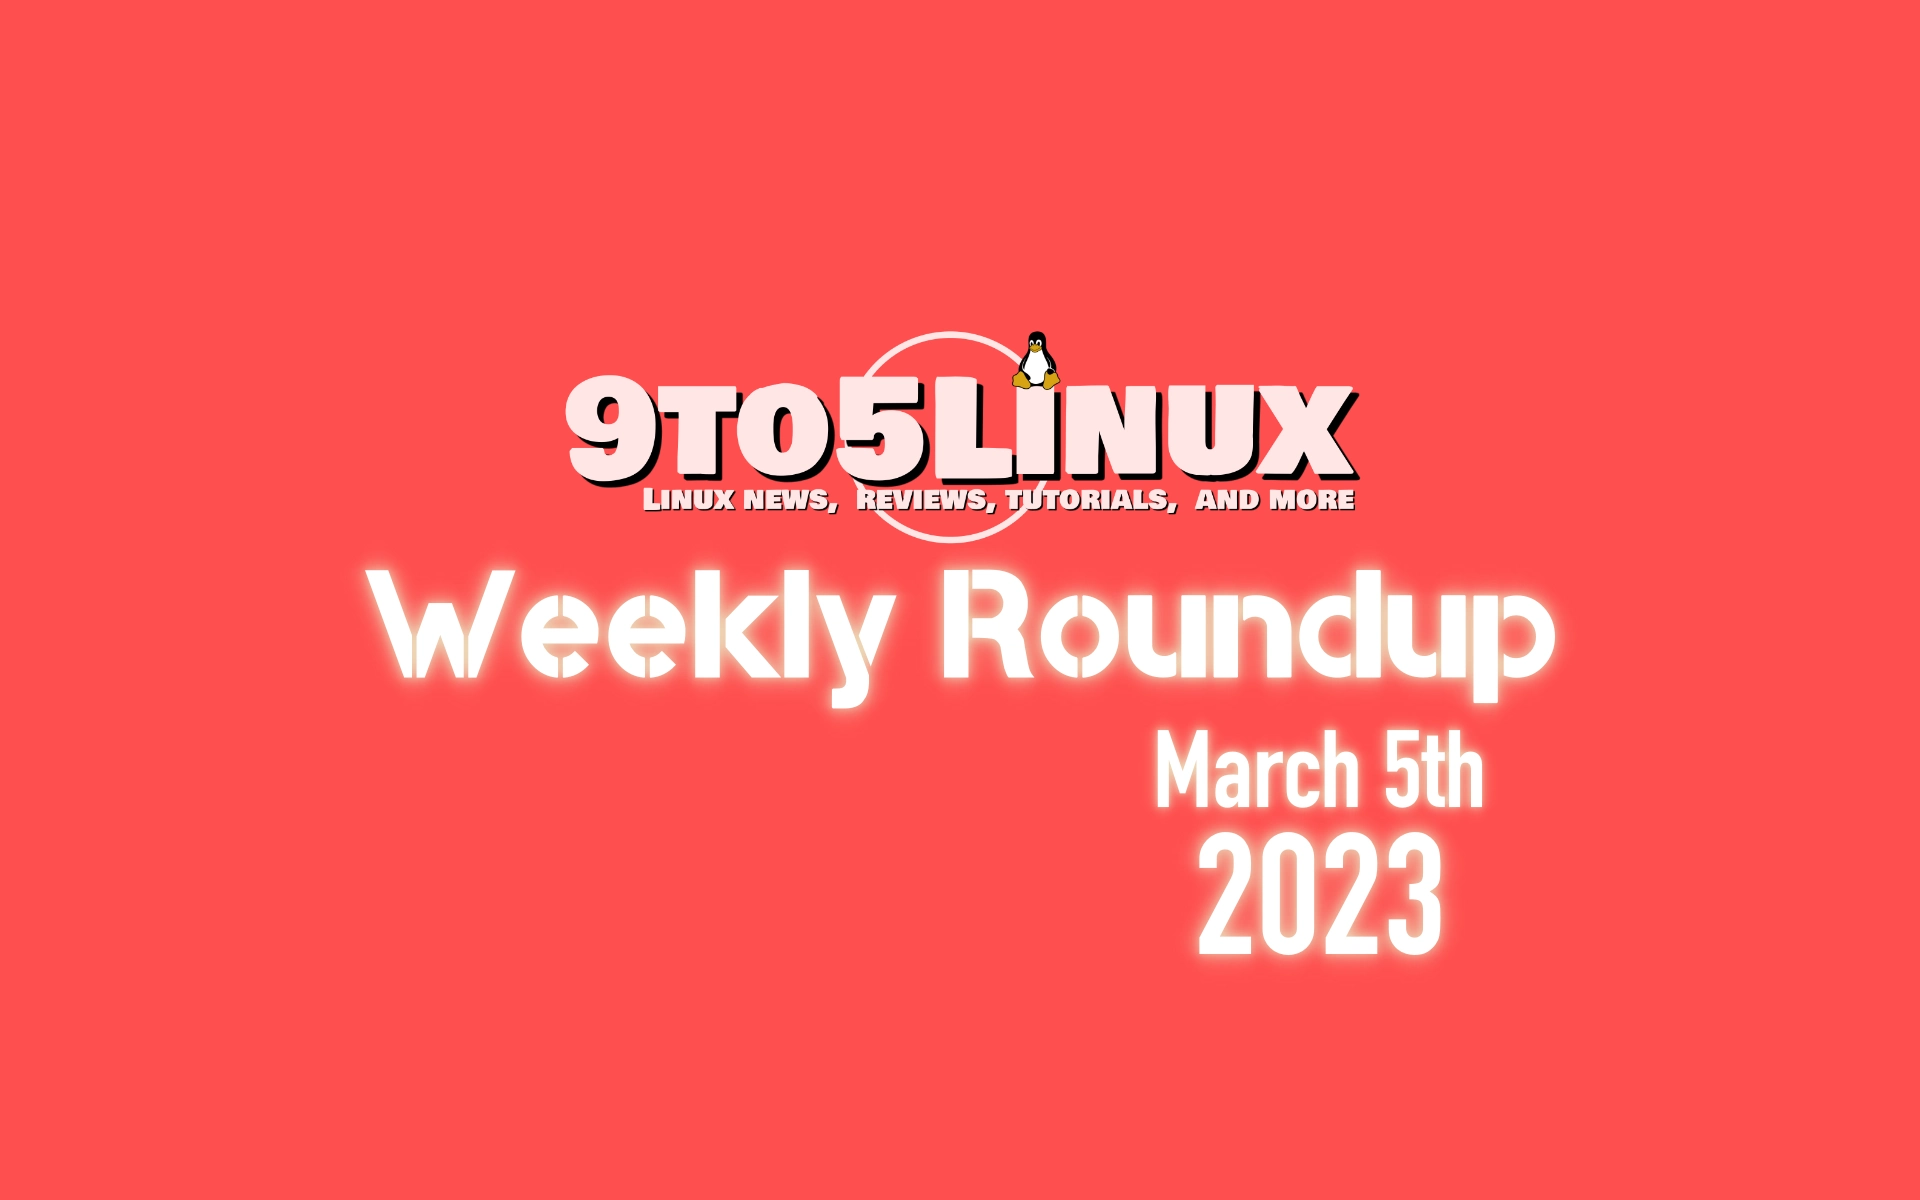 9to5Linux Weekly Roundup: March 5th, 2023